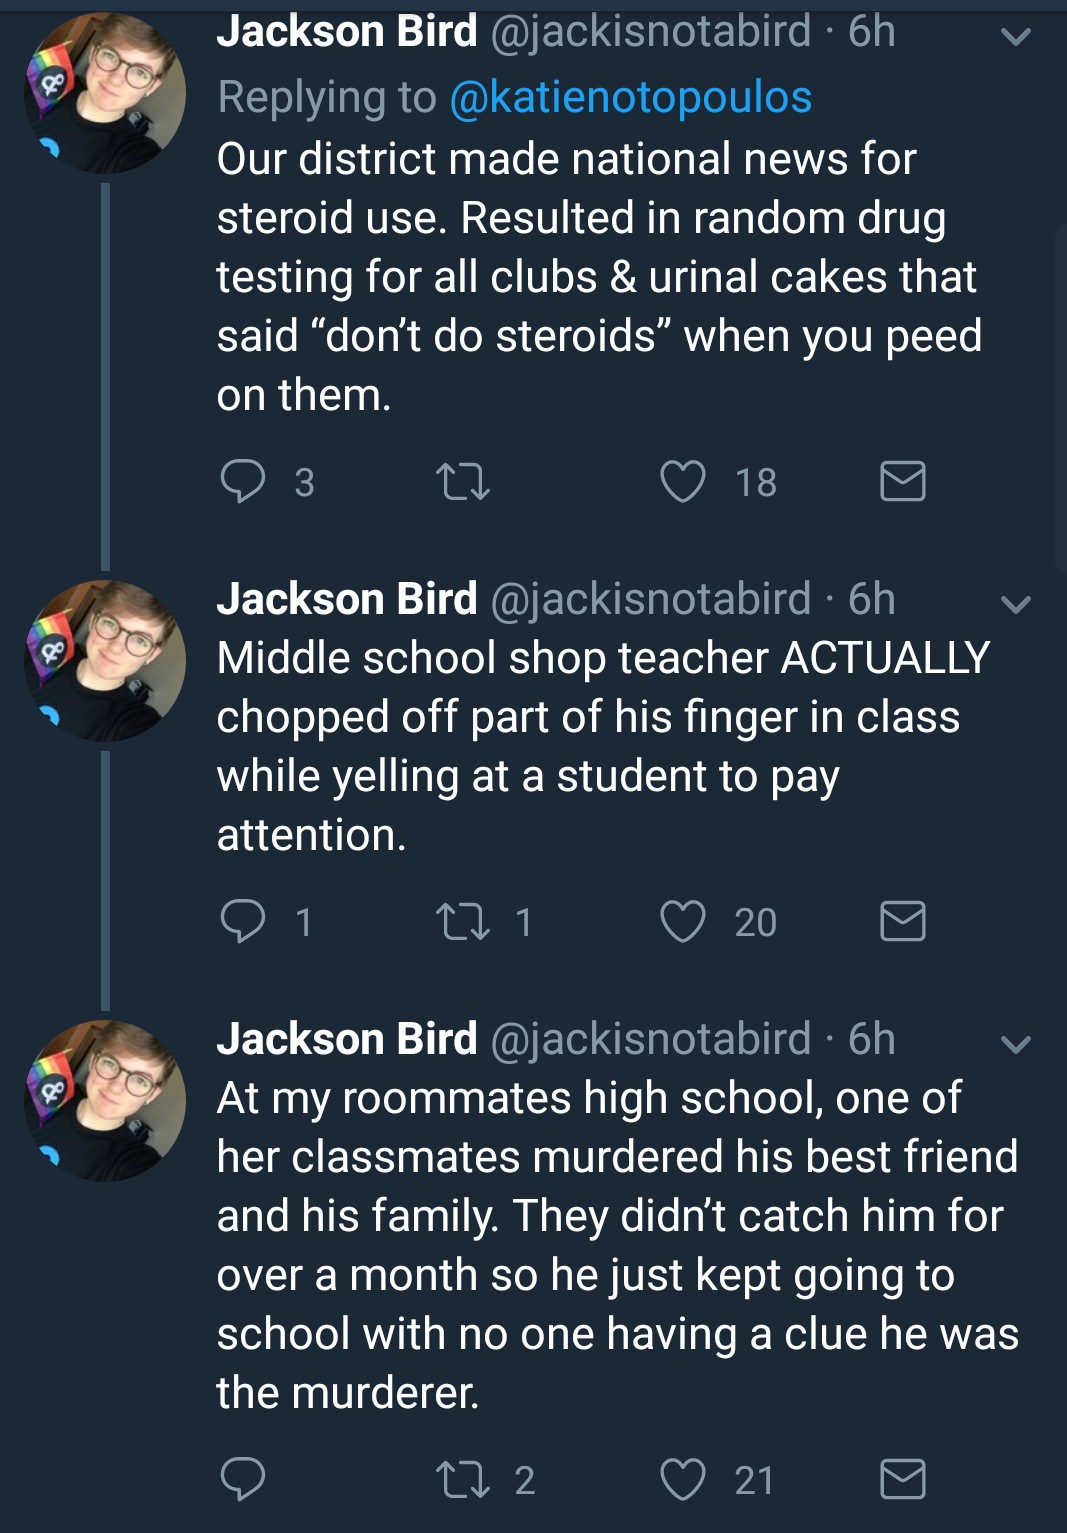 screenshot - Jackson Bird 6h v Our district made national news for steroid use. Resulted in random drug testing for all clubs & urinal cakes that said don't do steroids" when you peed on them. o 3 27 18 o Jackson Bird 6h Middle school shop teacher Actuall